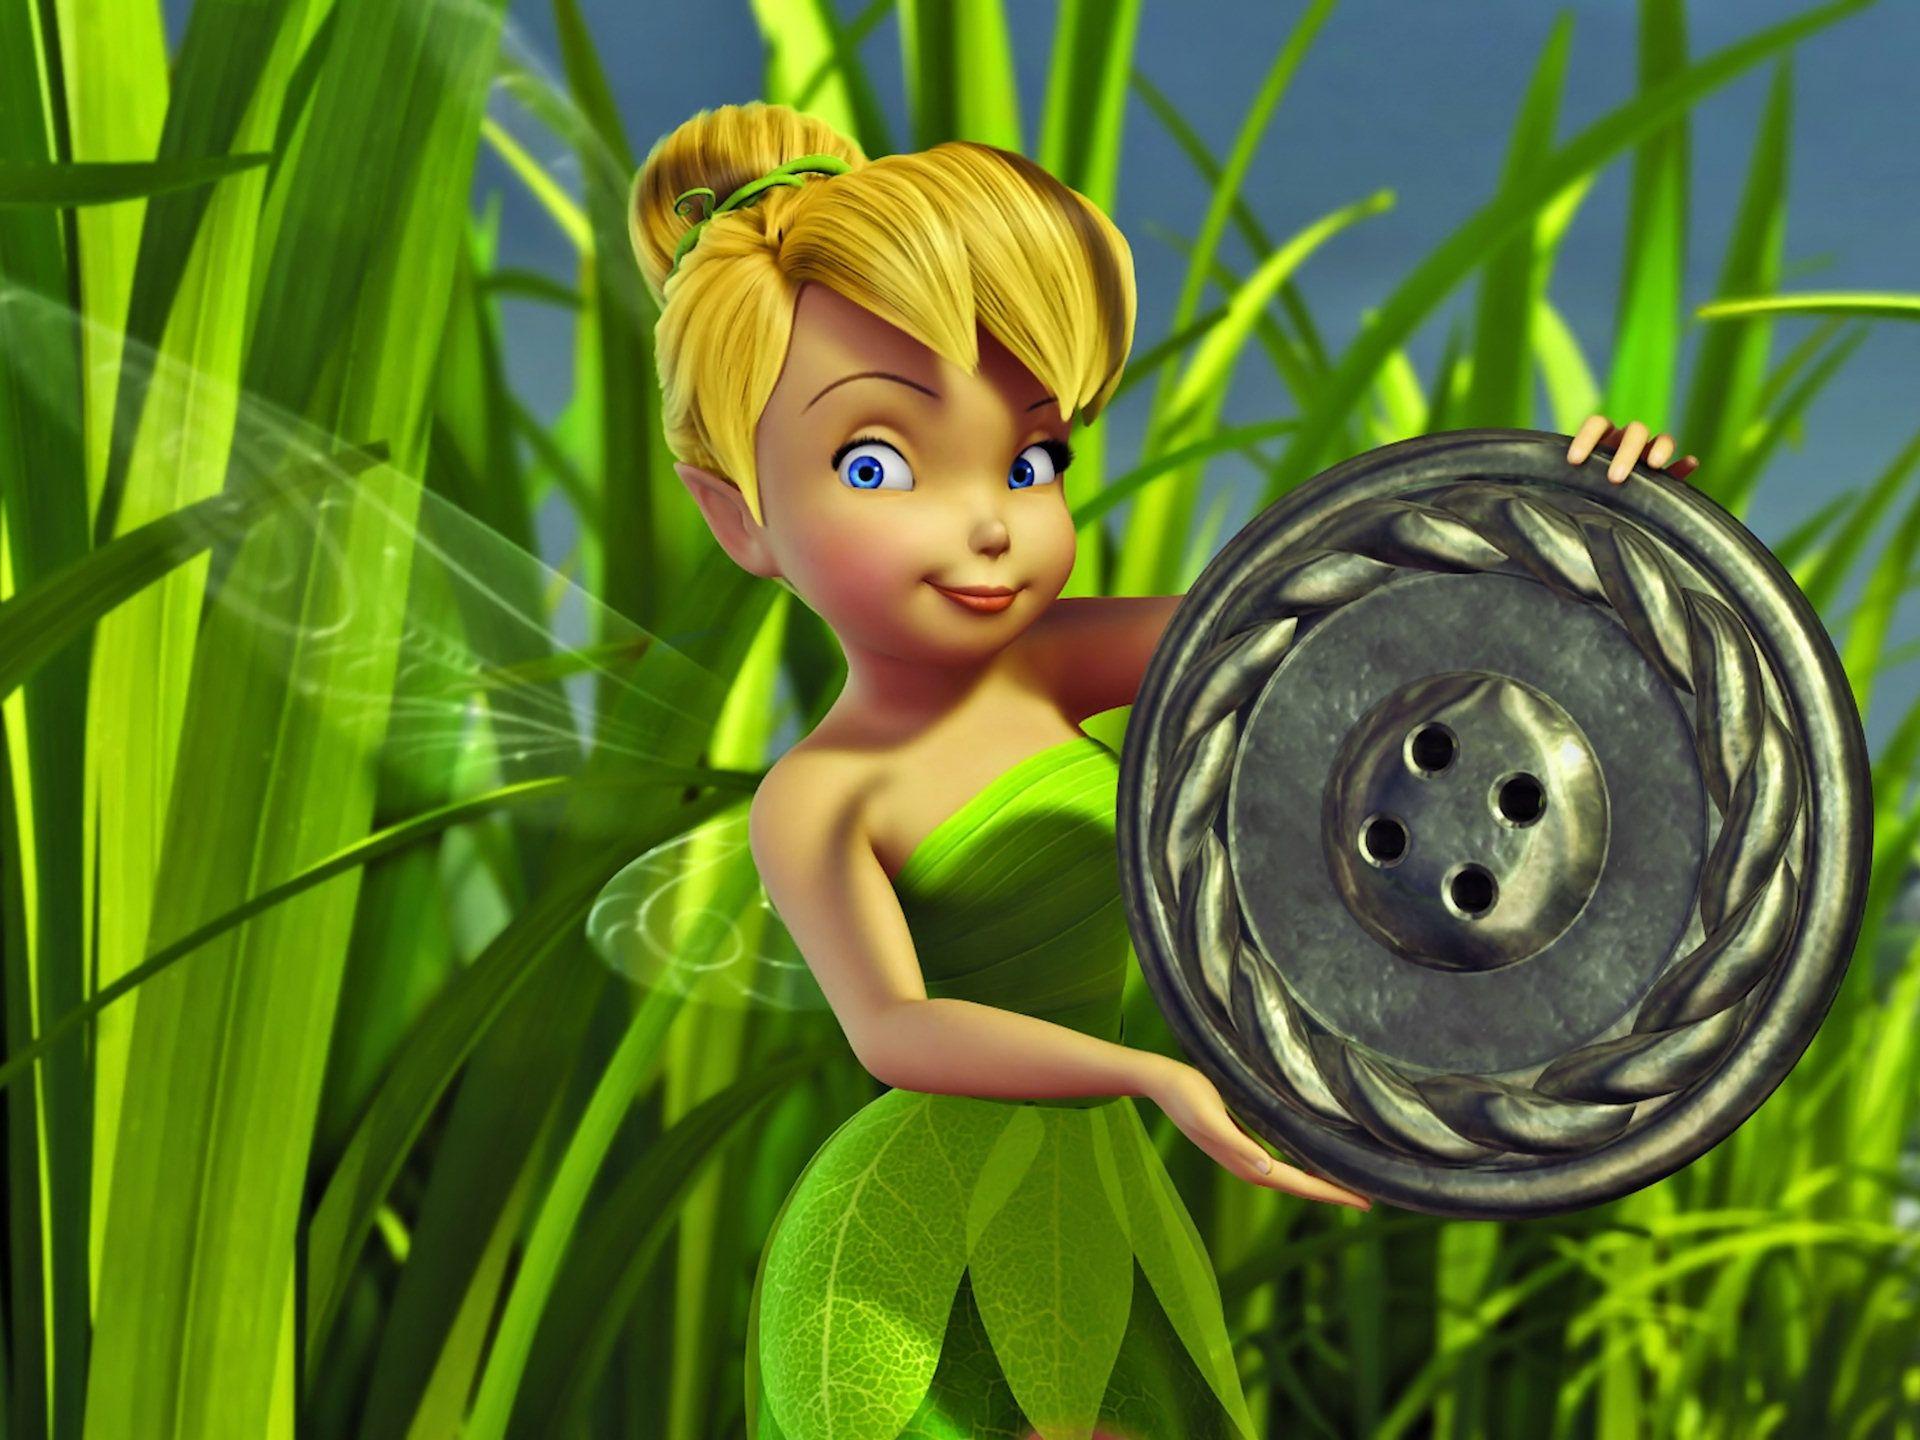 Tinkerbell Background